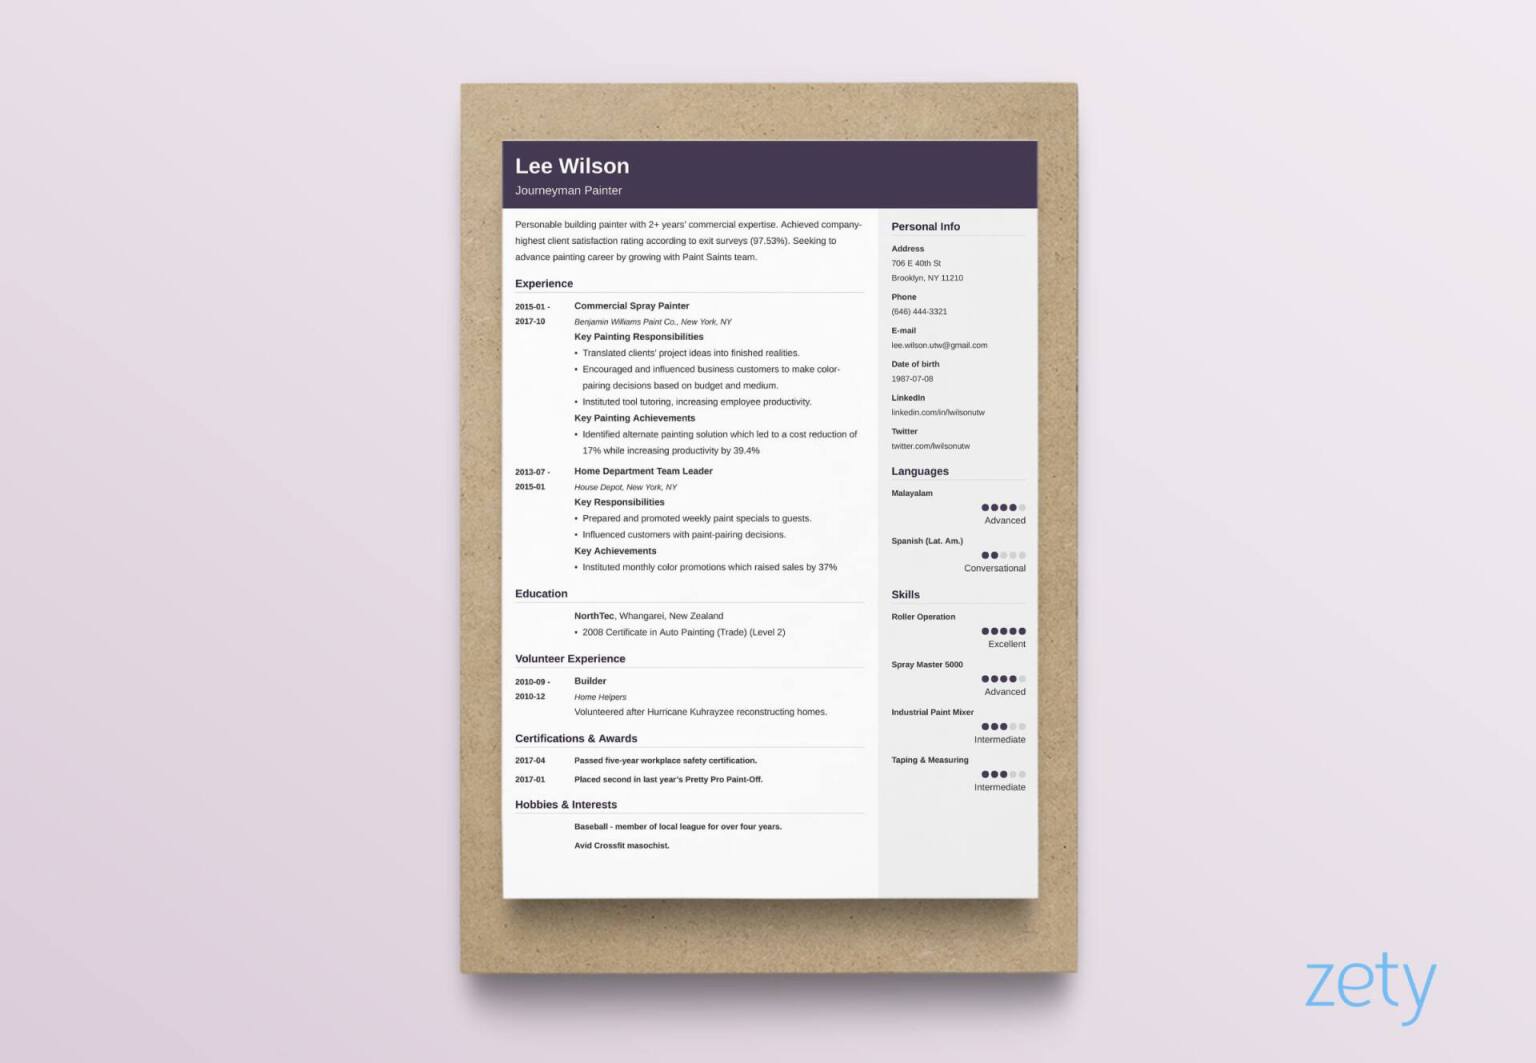 Best Resume Layouts: 20+ Examples (from Idea to Design)